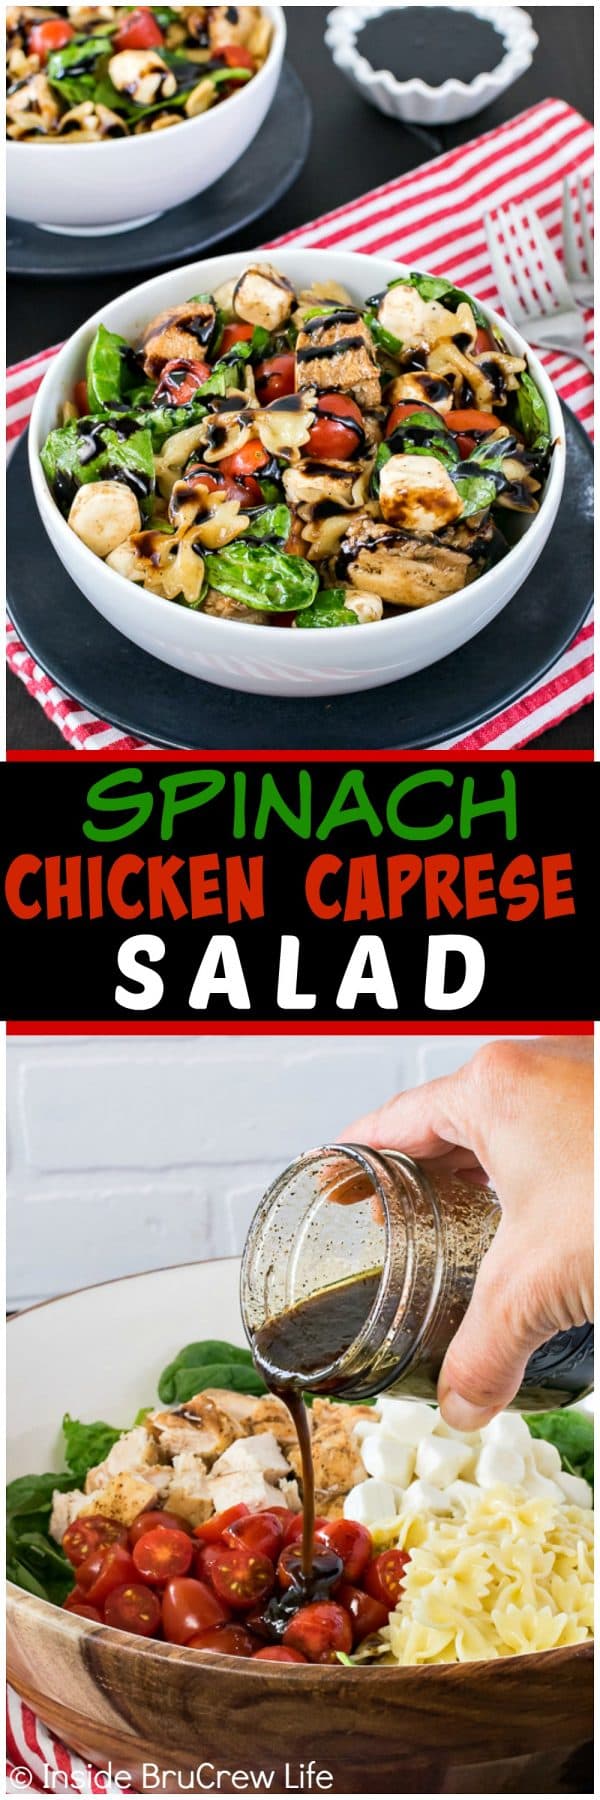 Spinach Chicken Caprese Salad - a homemade balsamic dressing mixed in with veggies and chicken makes this salad a healthy option for dinner. Easy recipe to make on those busy nights!